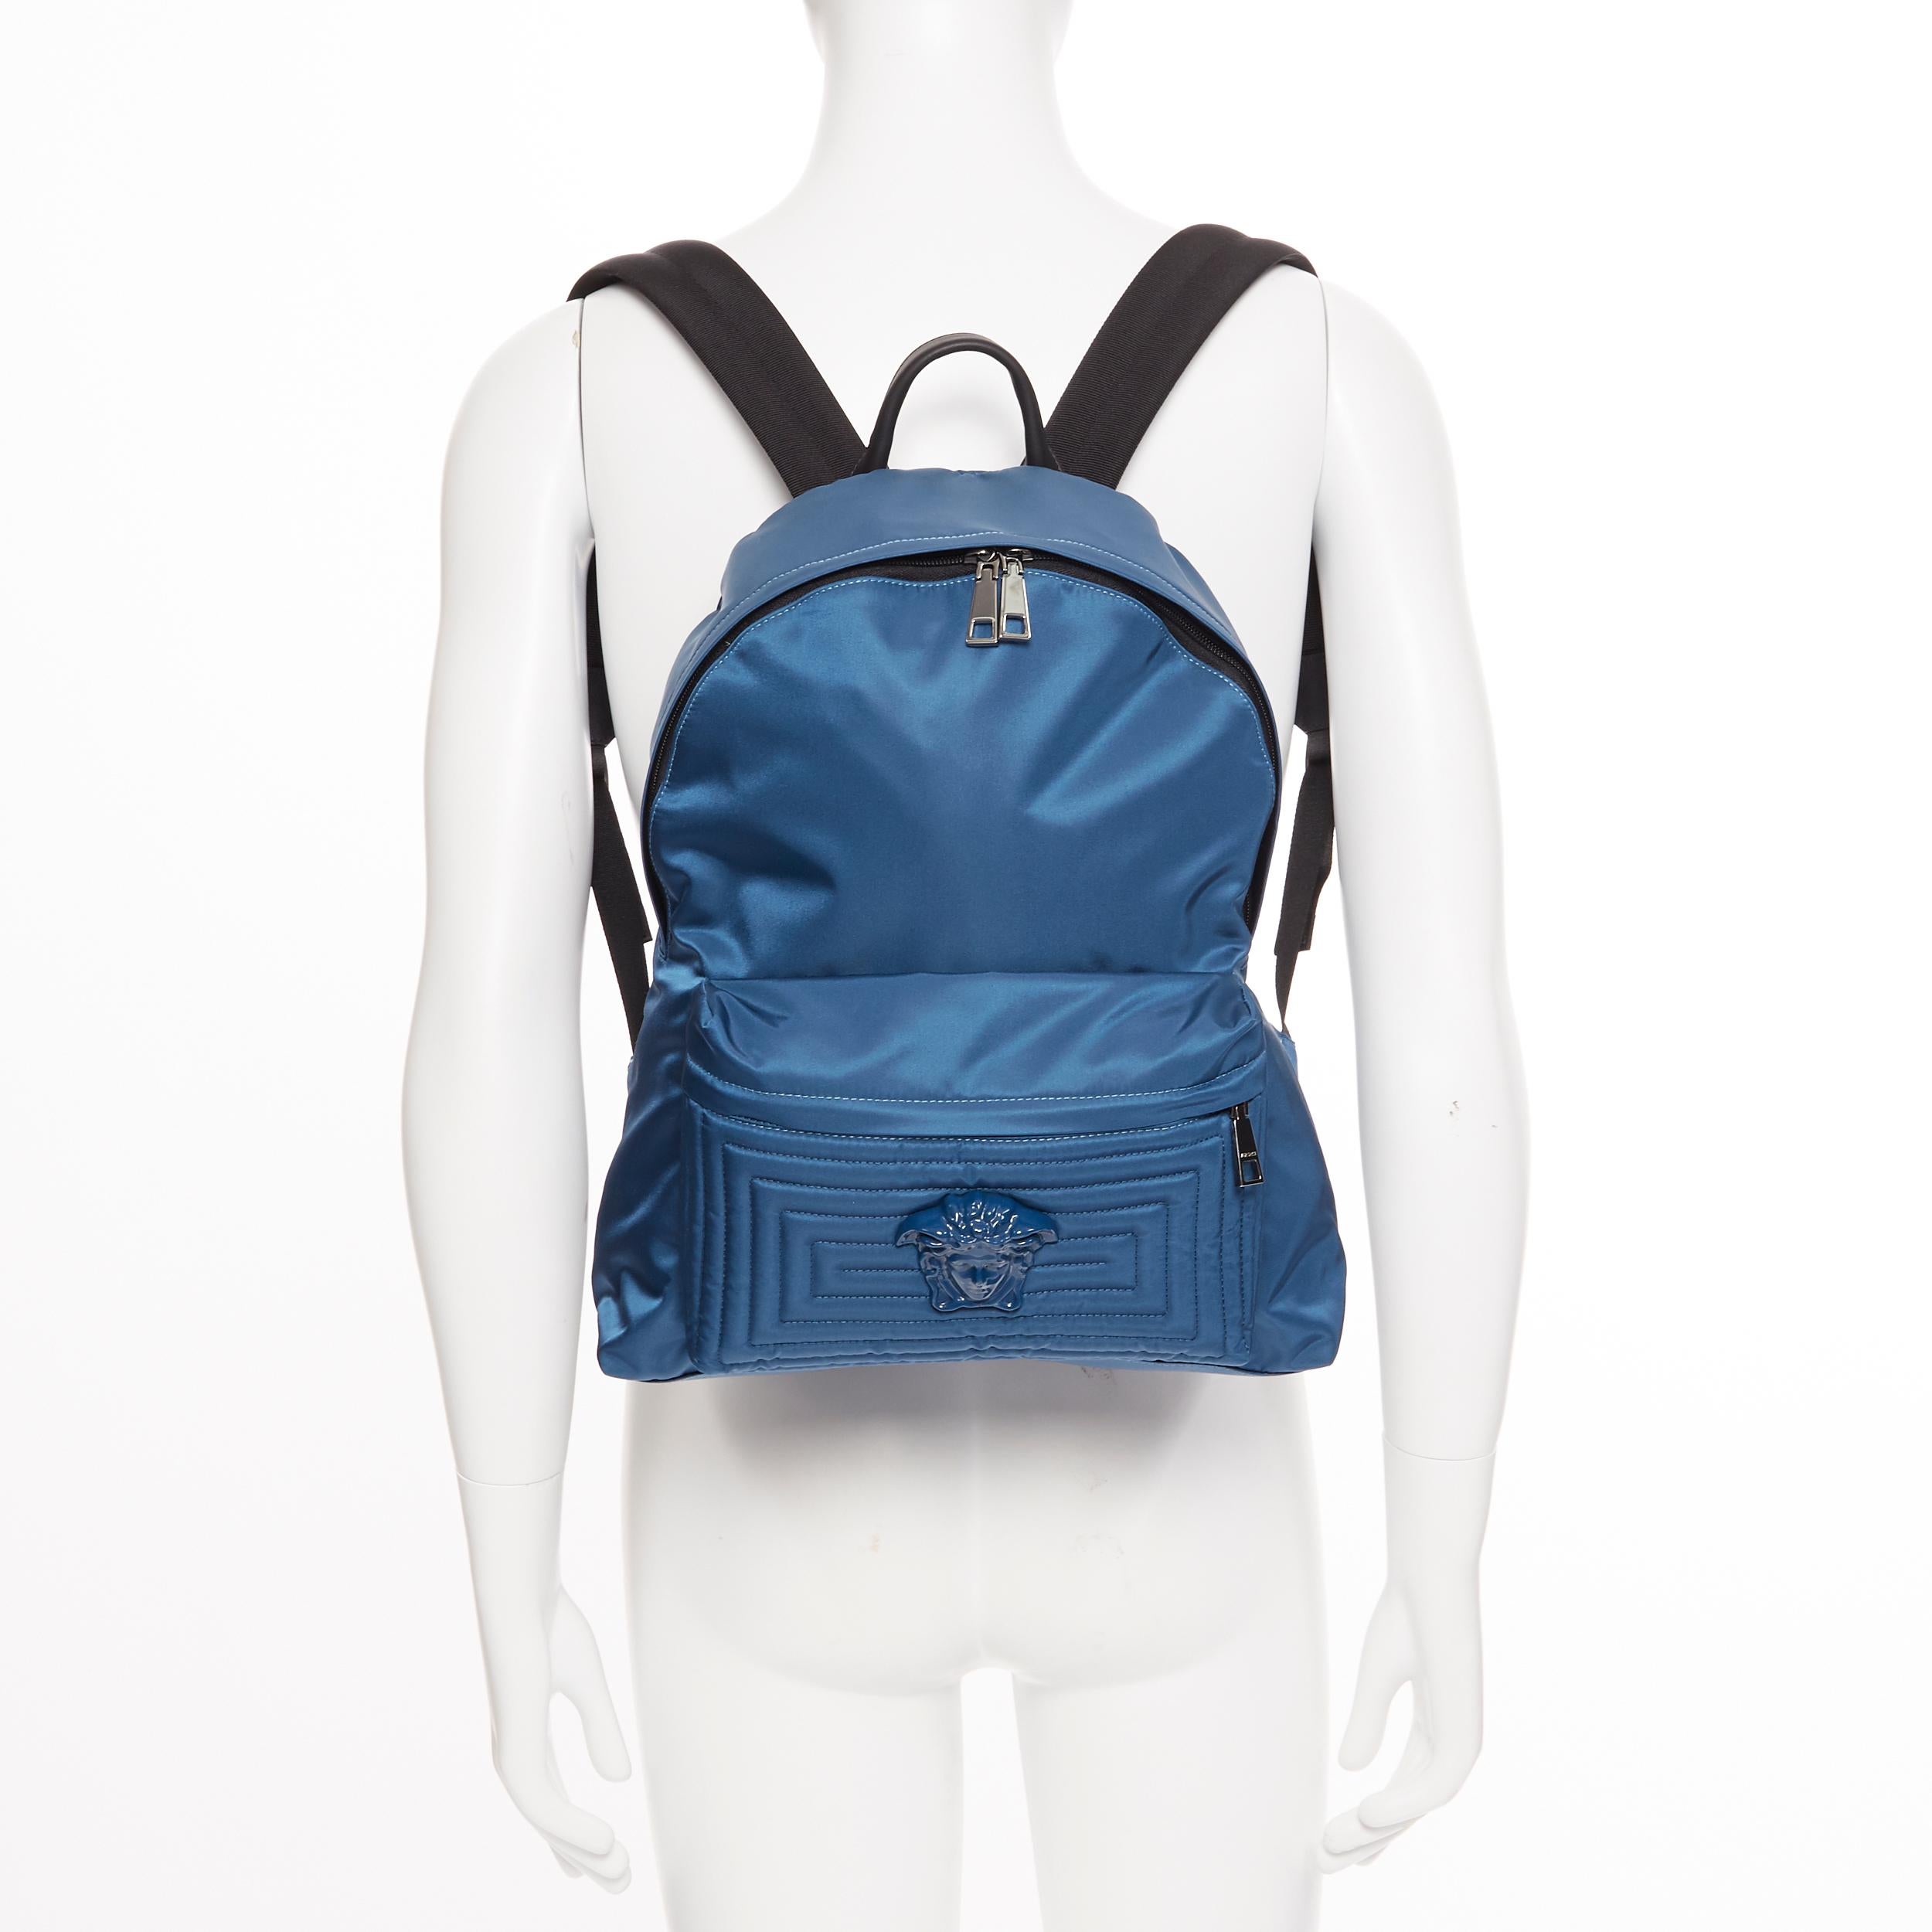 new VERSACE Palazzo Medusa navy nylon Greca stitch front pocket backpack 
Brand: Versace
Designer: Donatella Versace
Model Name / Style: Palazzo nylon backpack
Material: Nylon; leather handle
Color: Blue
Pattern: Solid
Closure: Zip
Lining material: